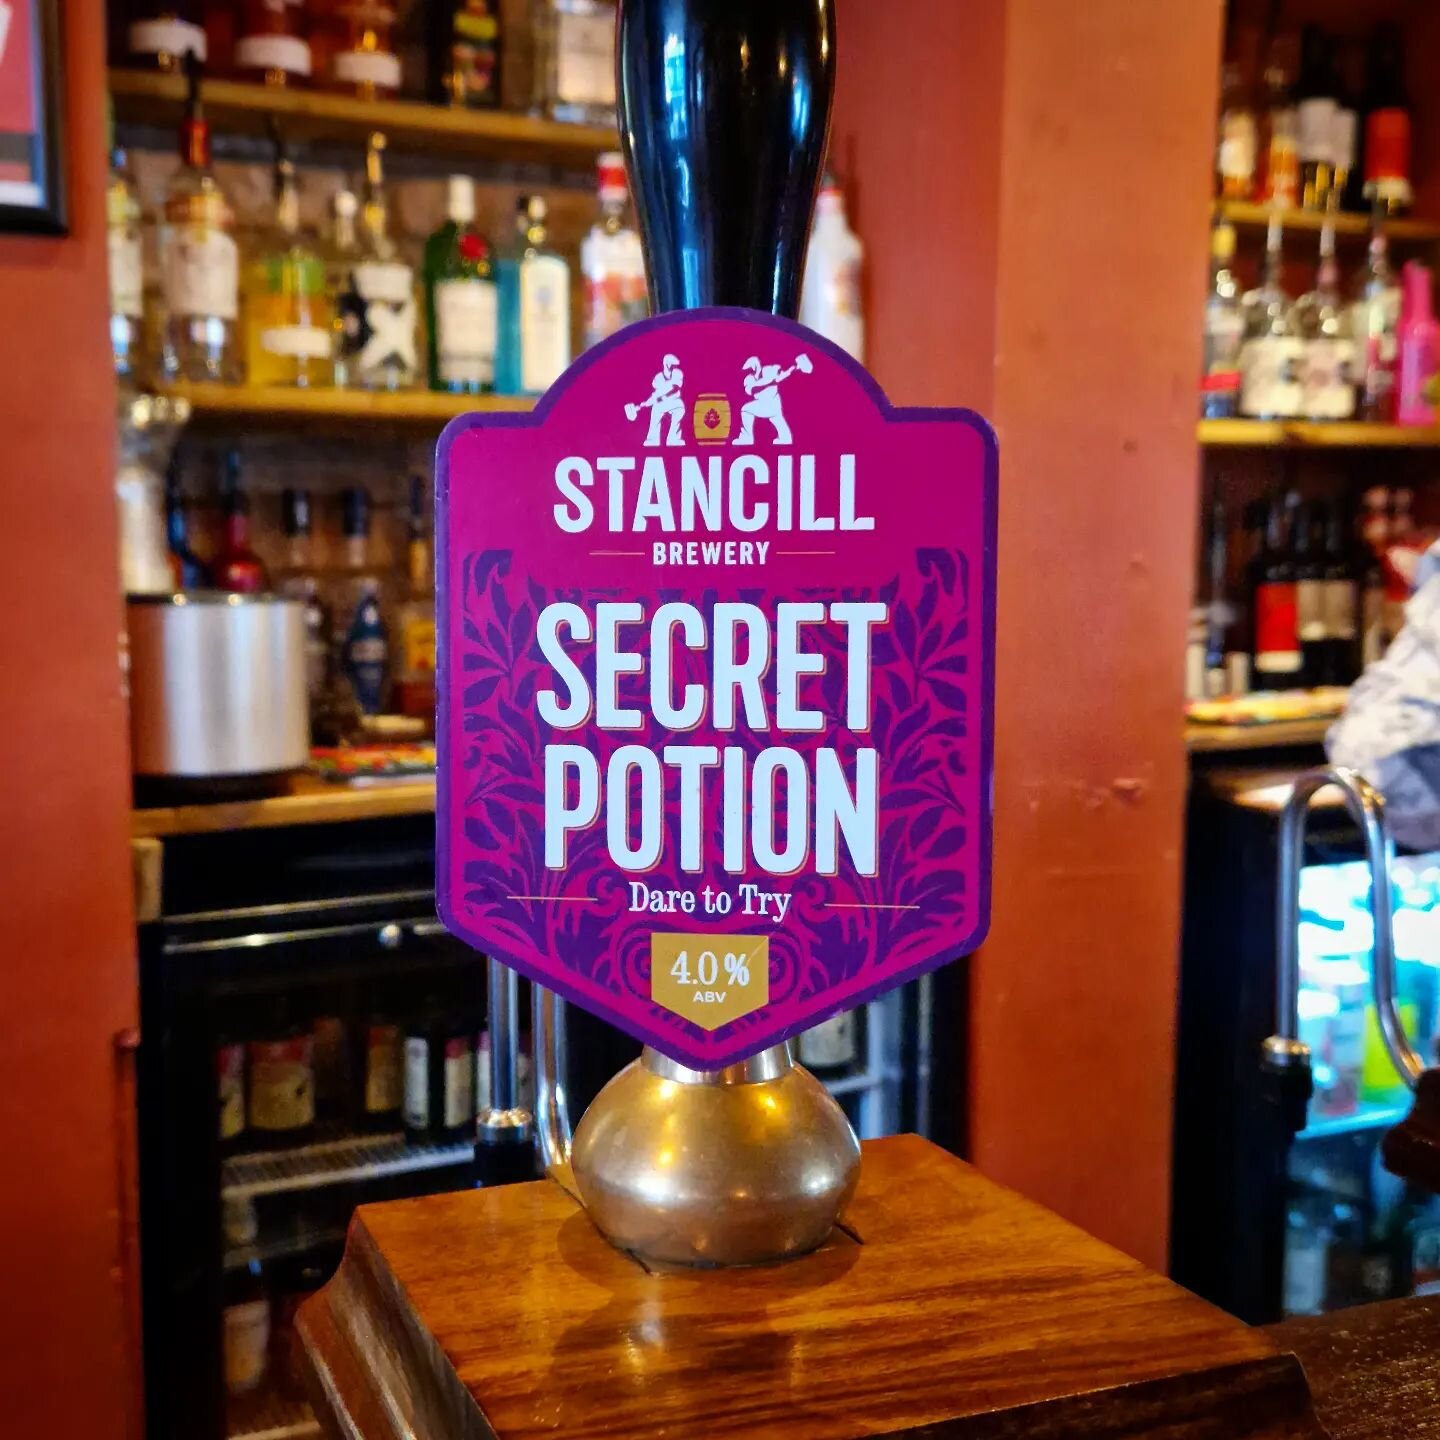 Dare to try SECRET POTION! As part of our 10th birthday celebrations, we dived into the archives to bring back this favourite from 2017! Zesty with pleasant floral aromas and a very pretty pump clip, #StancillSecretPotion is one hell of an irresistib